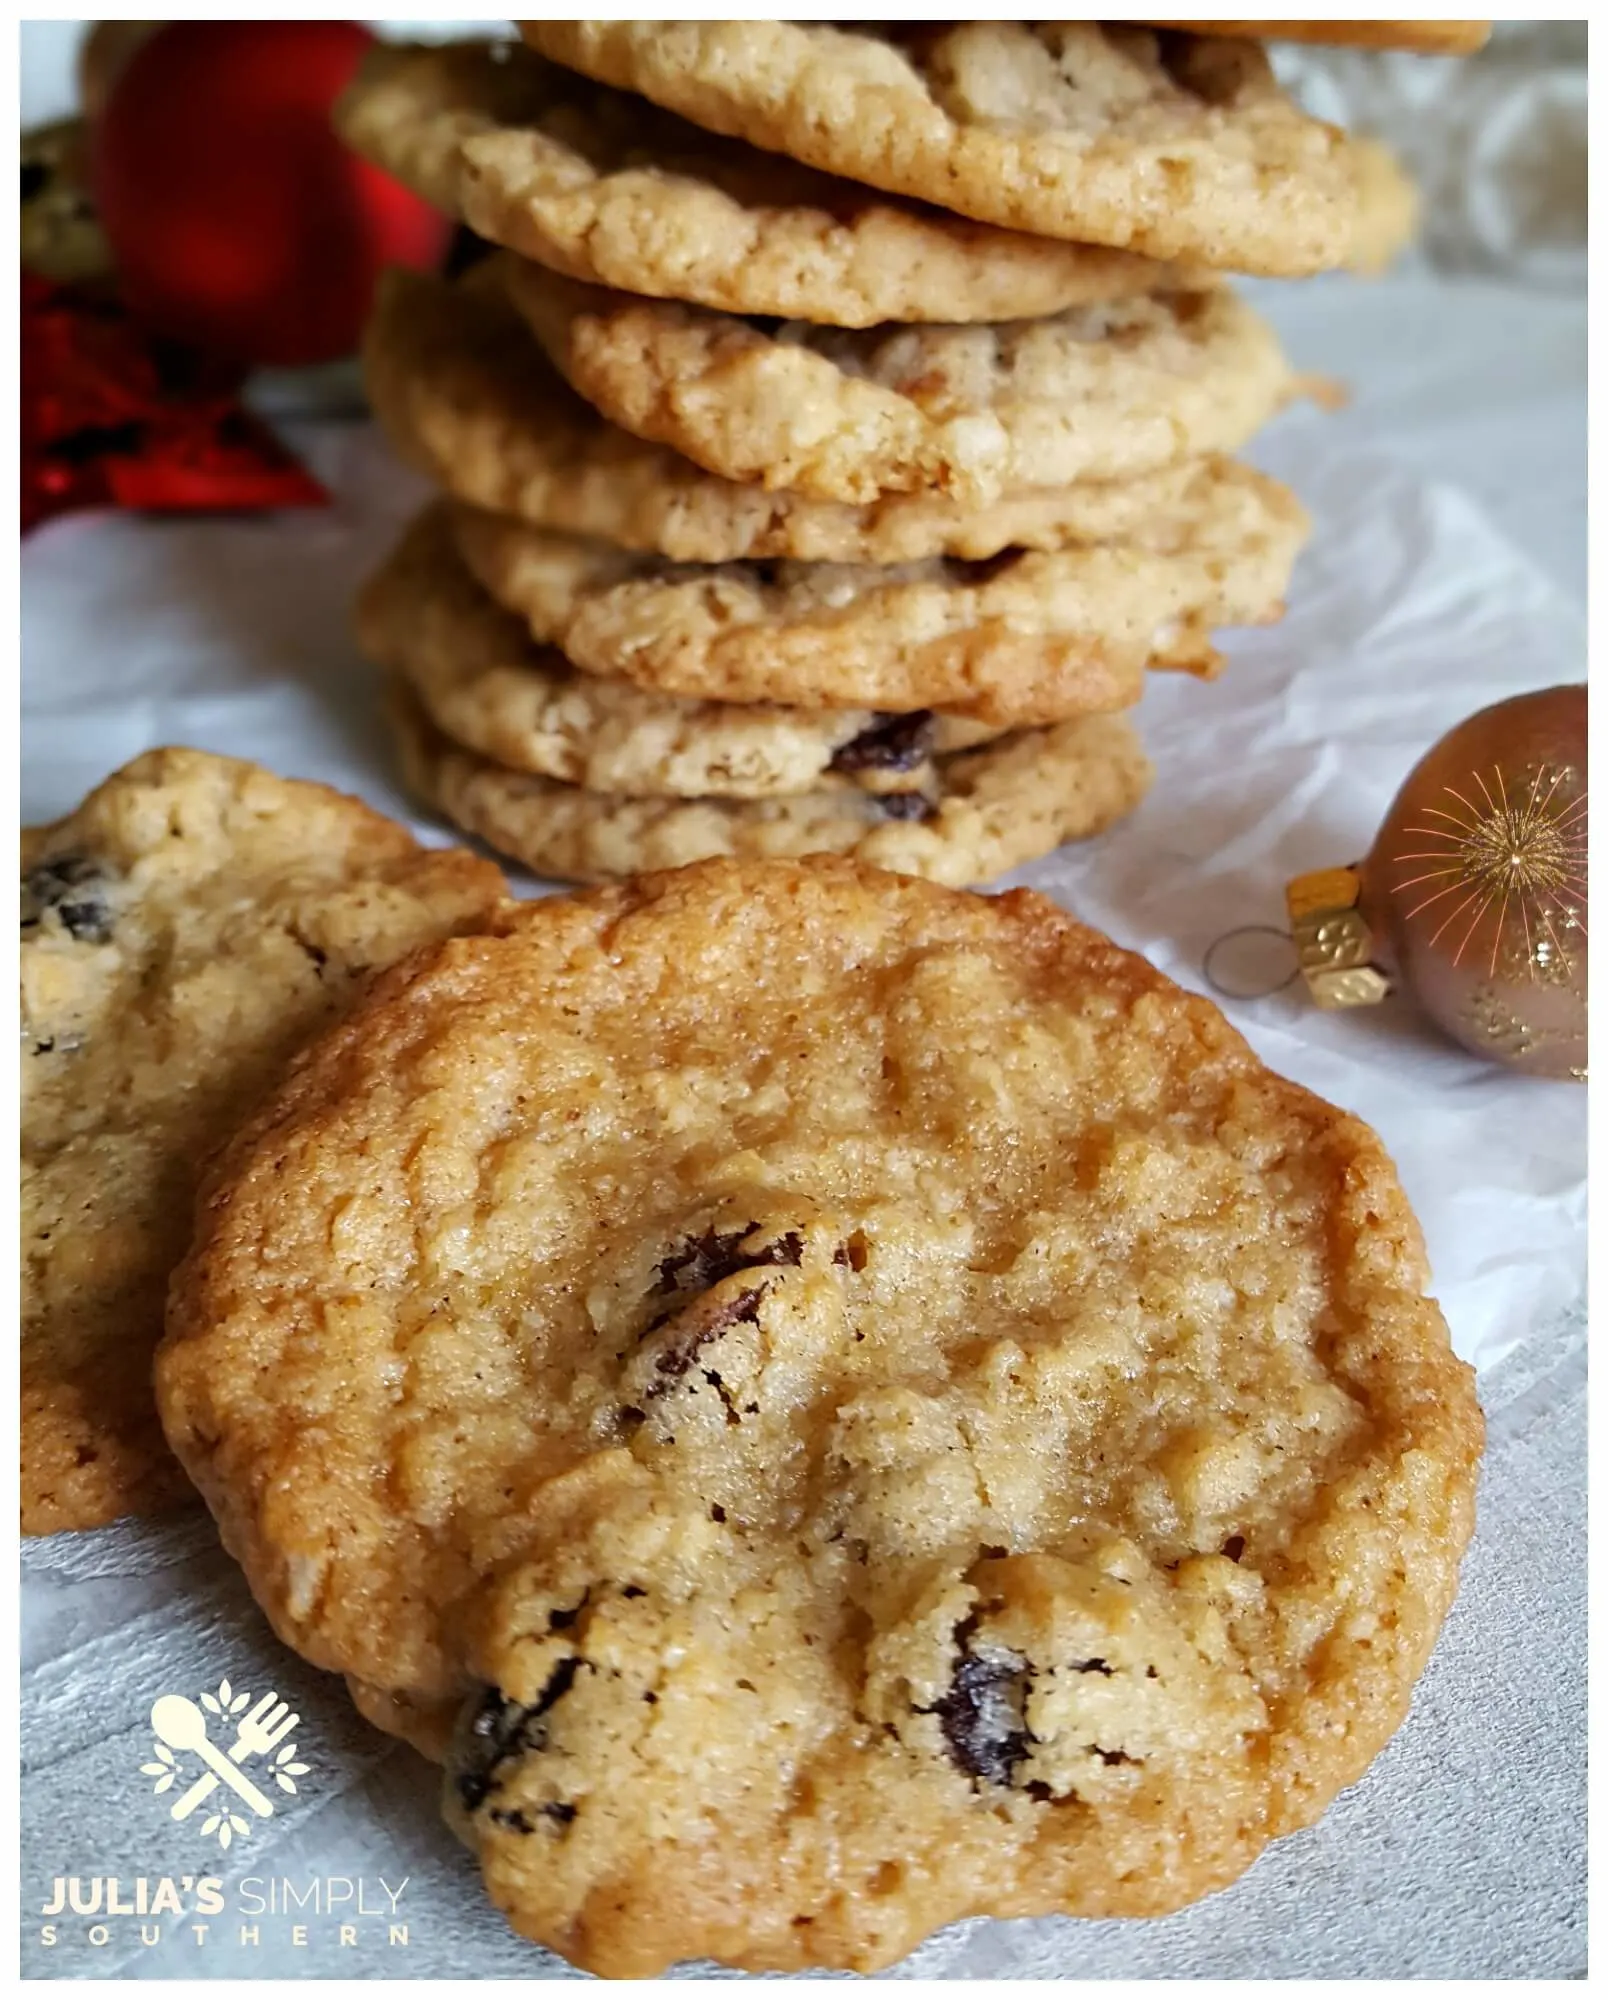 Most delicious oatmeal raisin cookies - soft and chewy